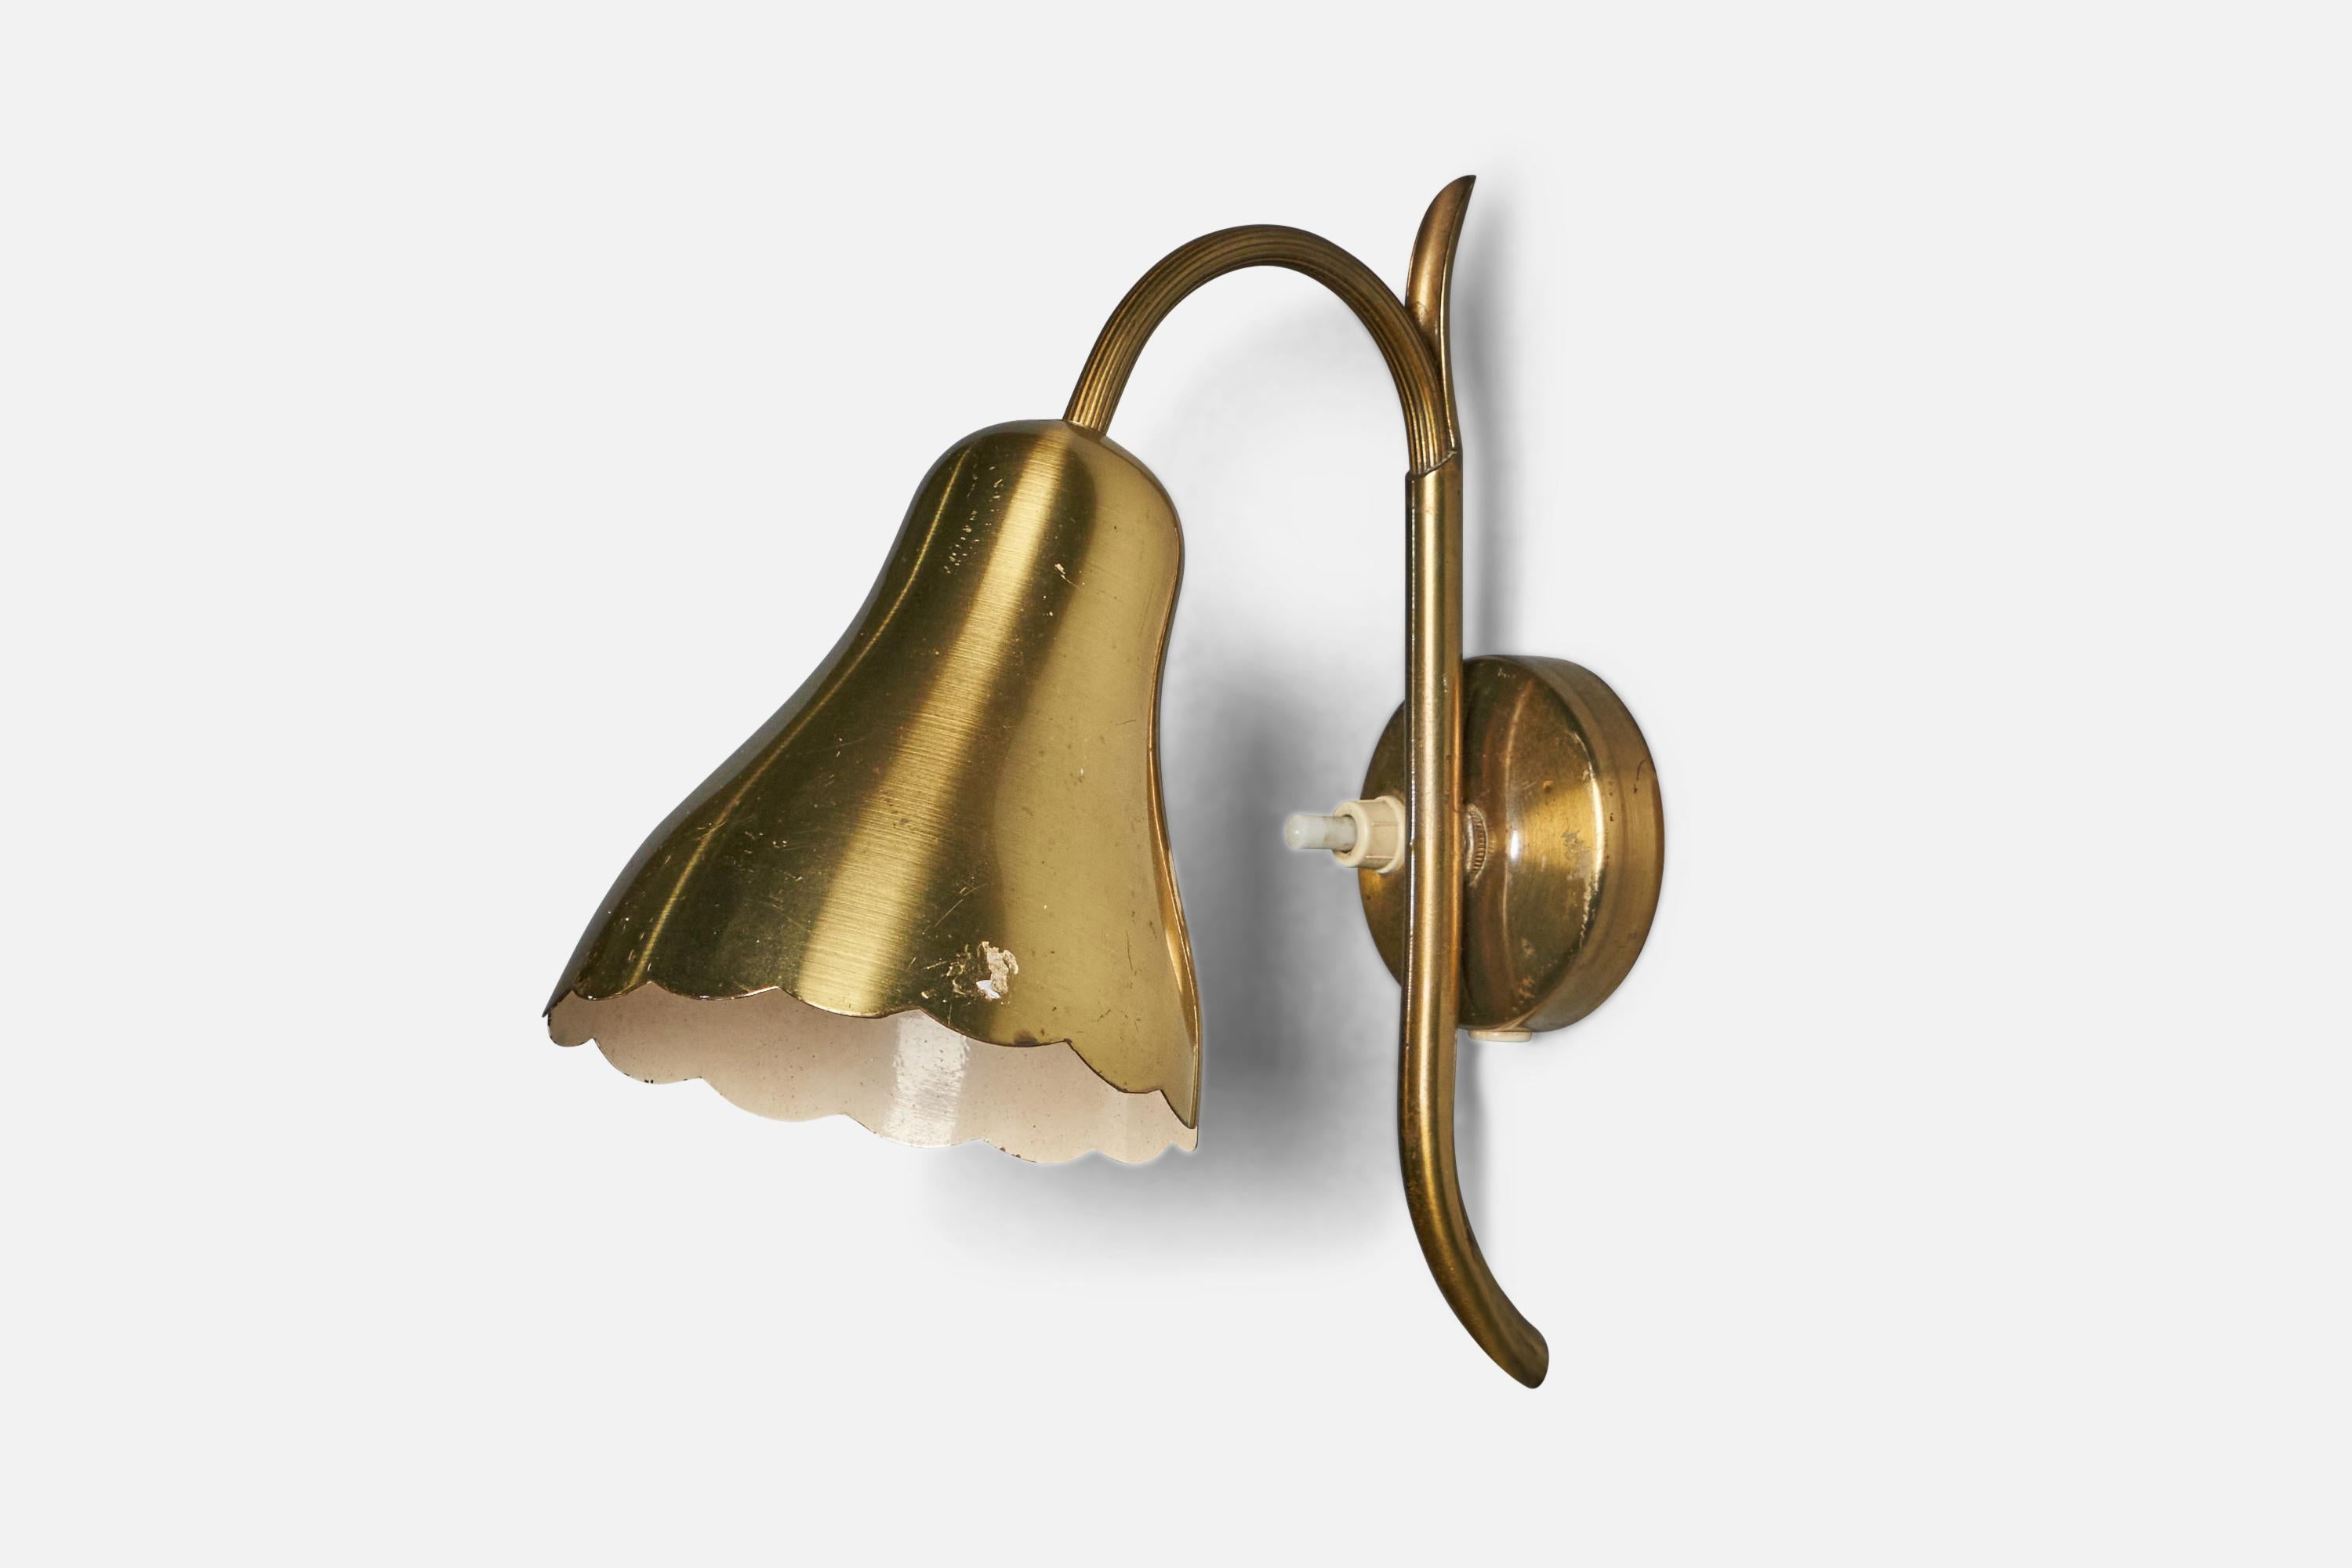 An organic brass wall light designed and produced in Denmark, 1940s.

Overall Dimensions (inches): 8” H x 4.25” W x 8.5” D
Back Plate Dimensions (inches): 2.5” Diameter x 0.6” D
Bulb Specifications: E-14 Bulb
Number of Sockets: 1